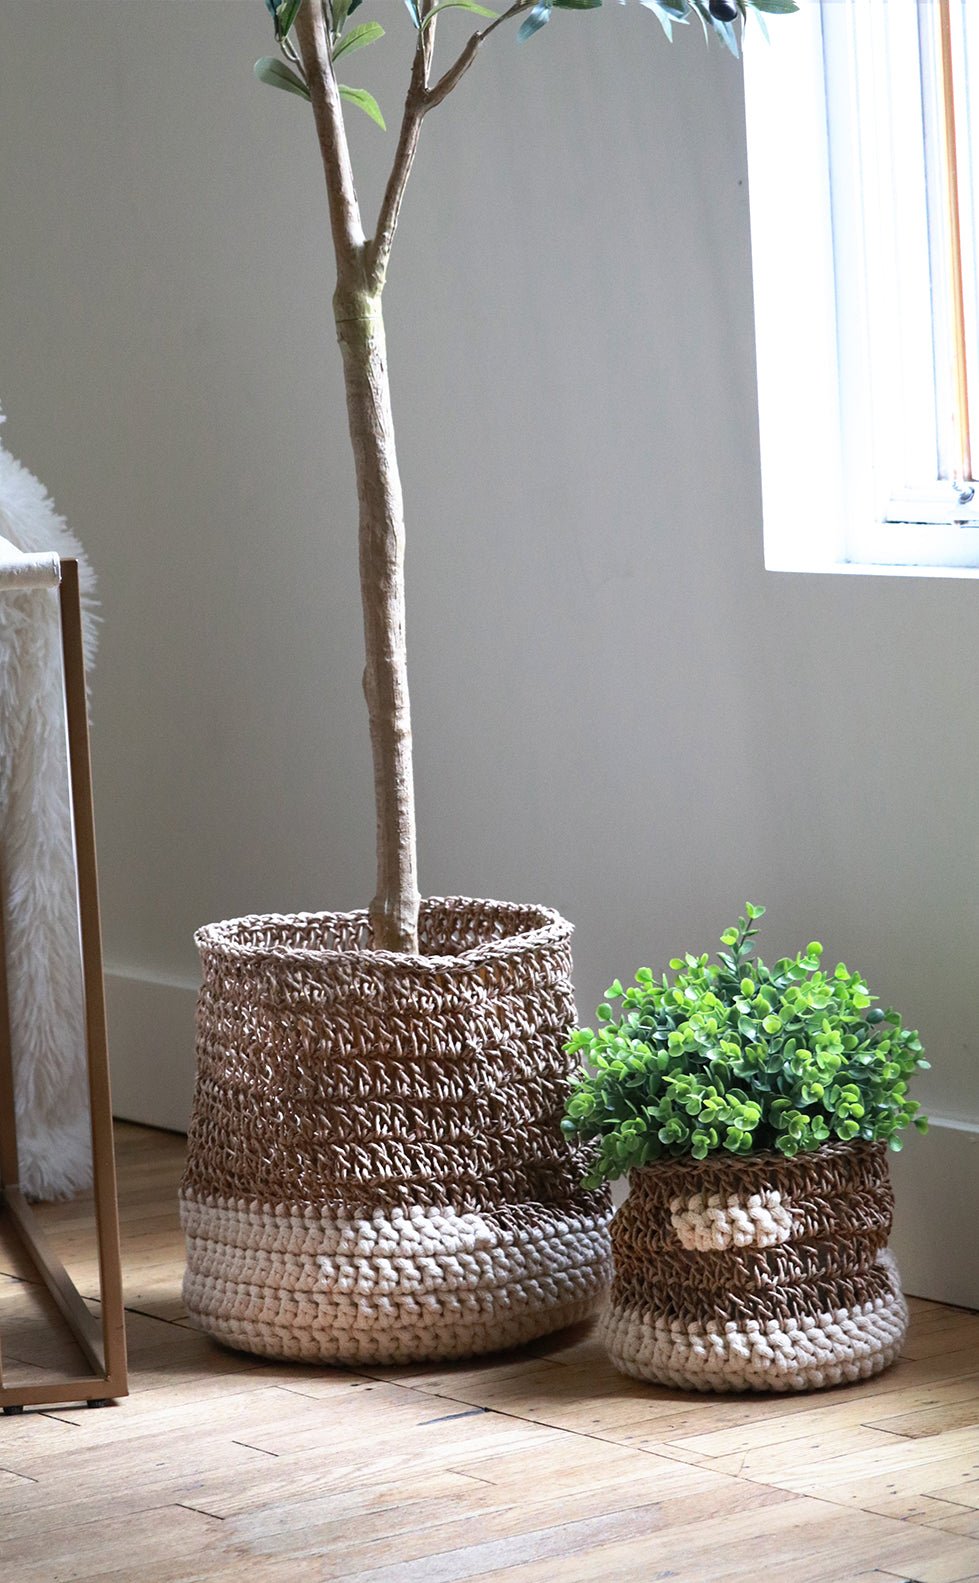 Zagrava Hand-Woven Basket White and Beige - The Modern Heritage